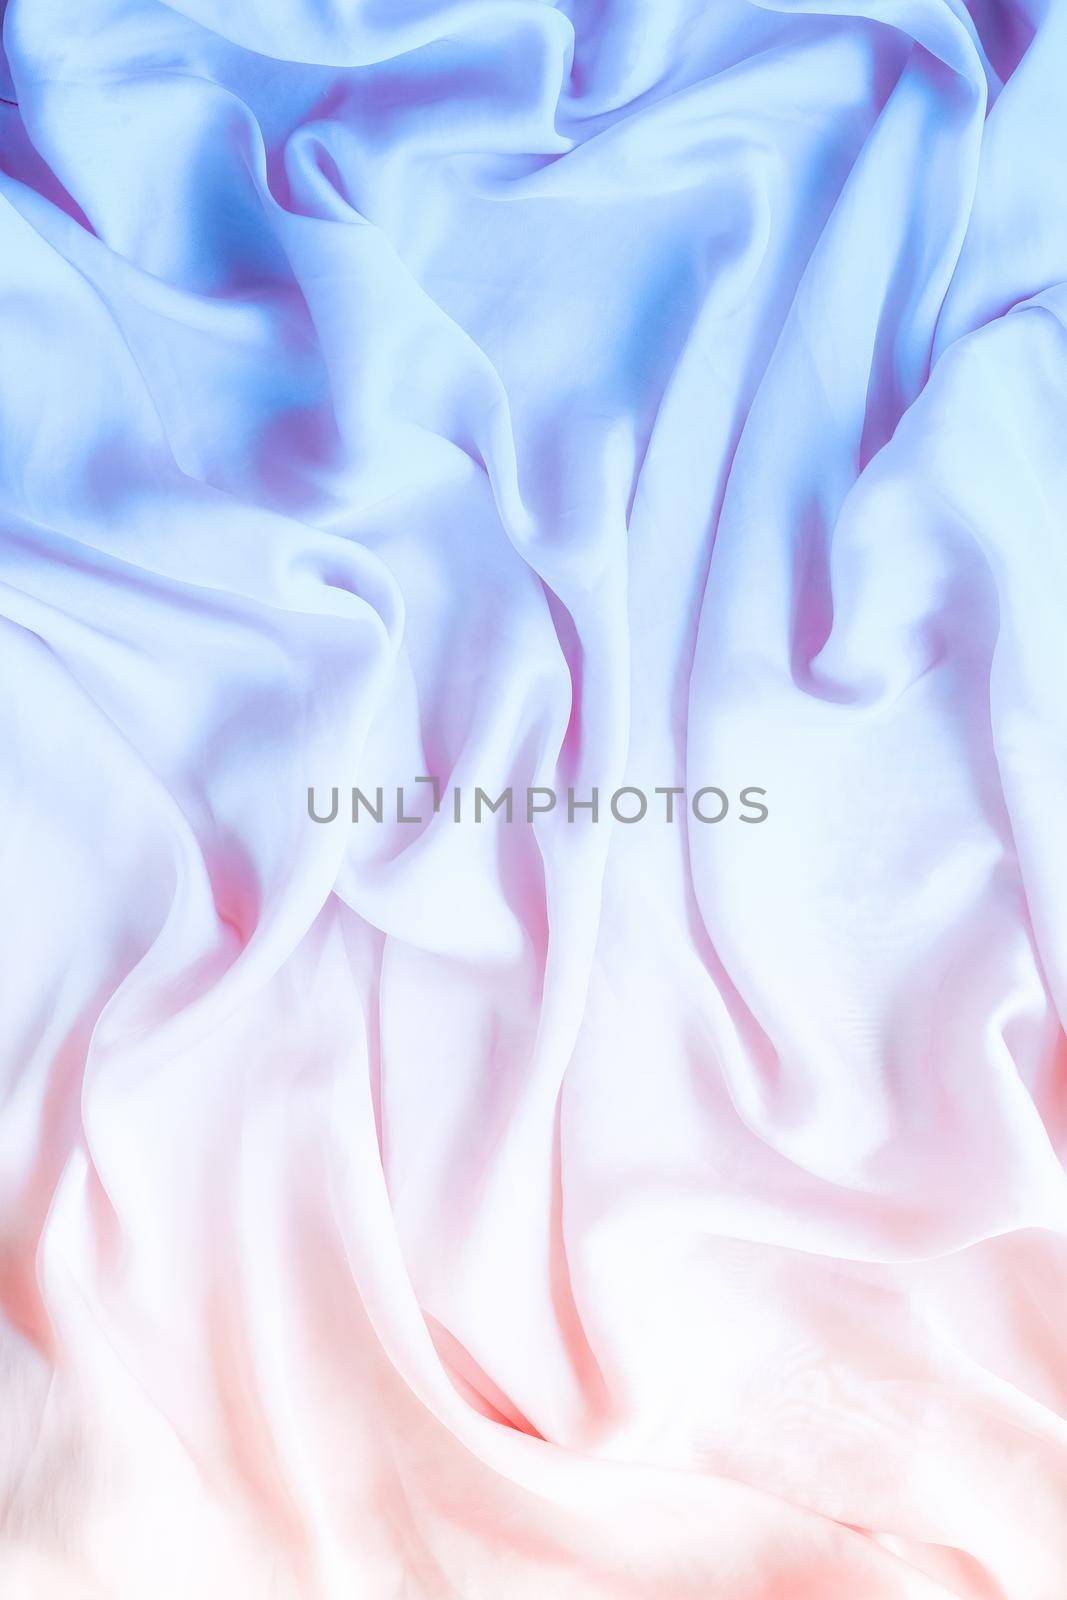 Neon soft silk waves, flatlay - elegant fabric textures, abstract backgrounds and modern pastel colours concept. Feel the sense of timeless luxury